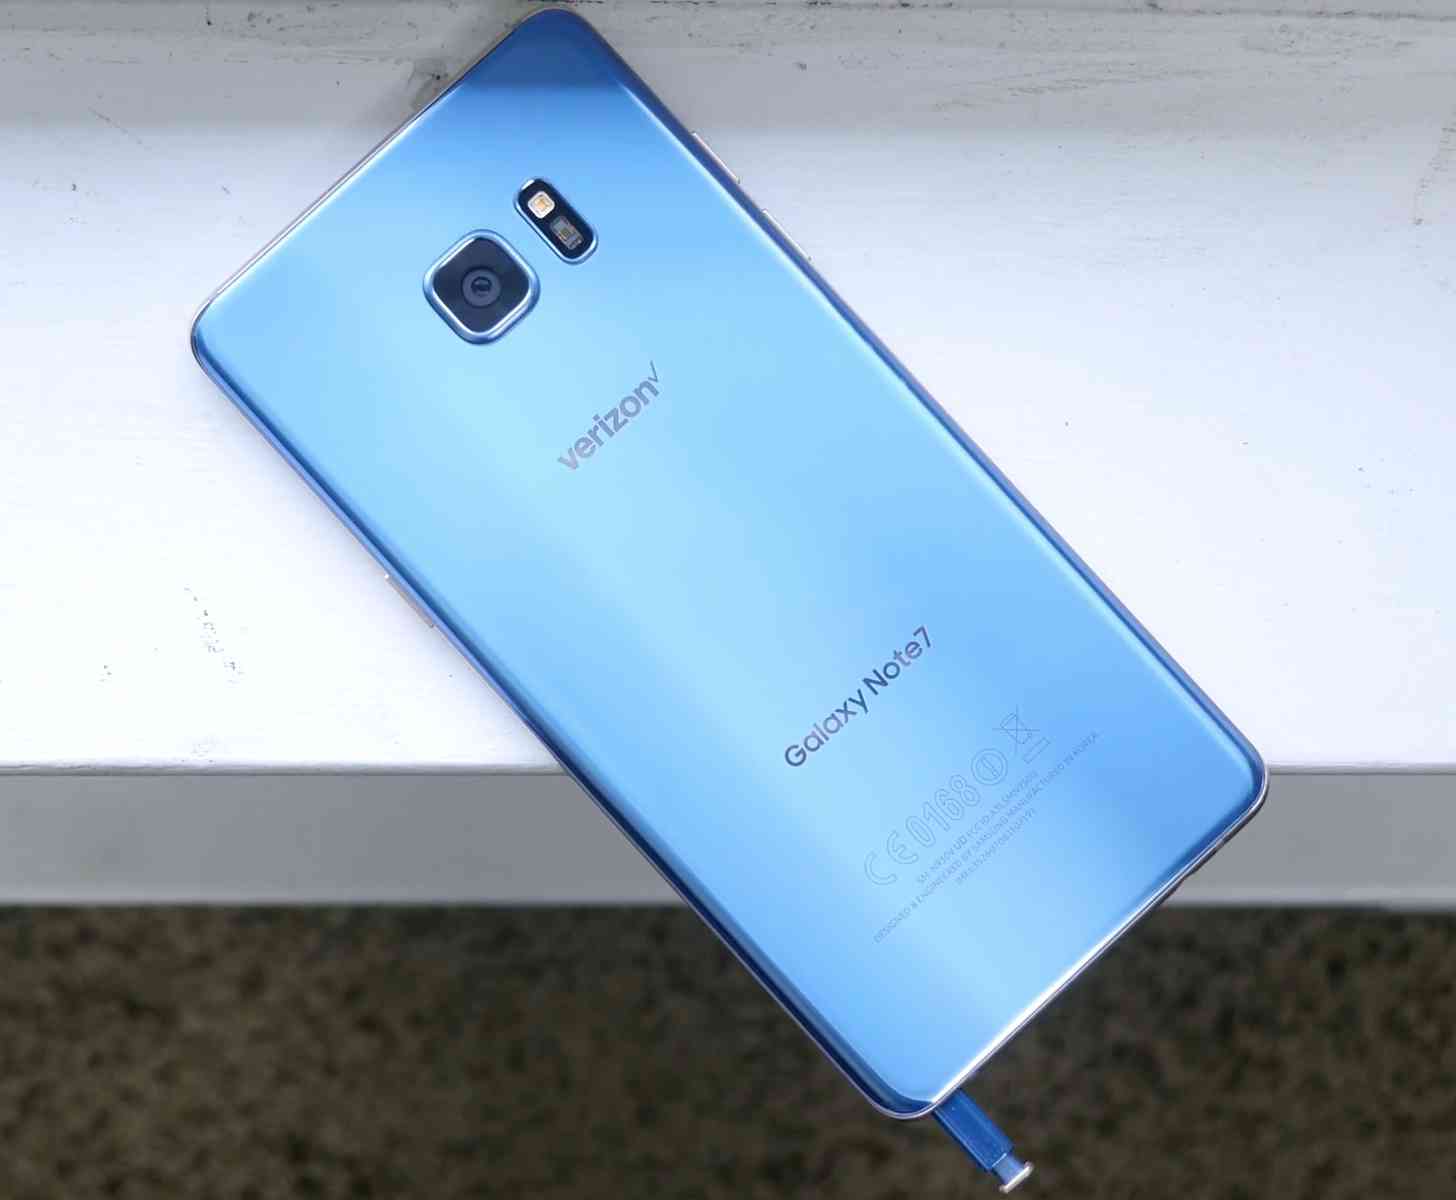 Samsung Galaxy Note 7 Blue Coral hands-on